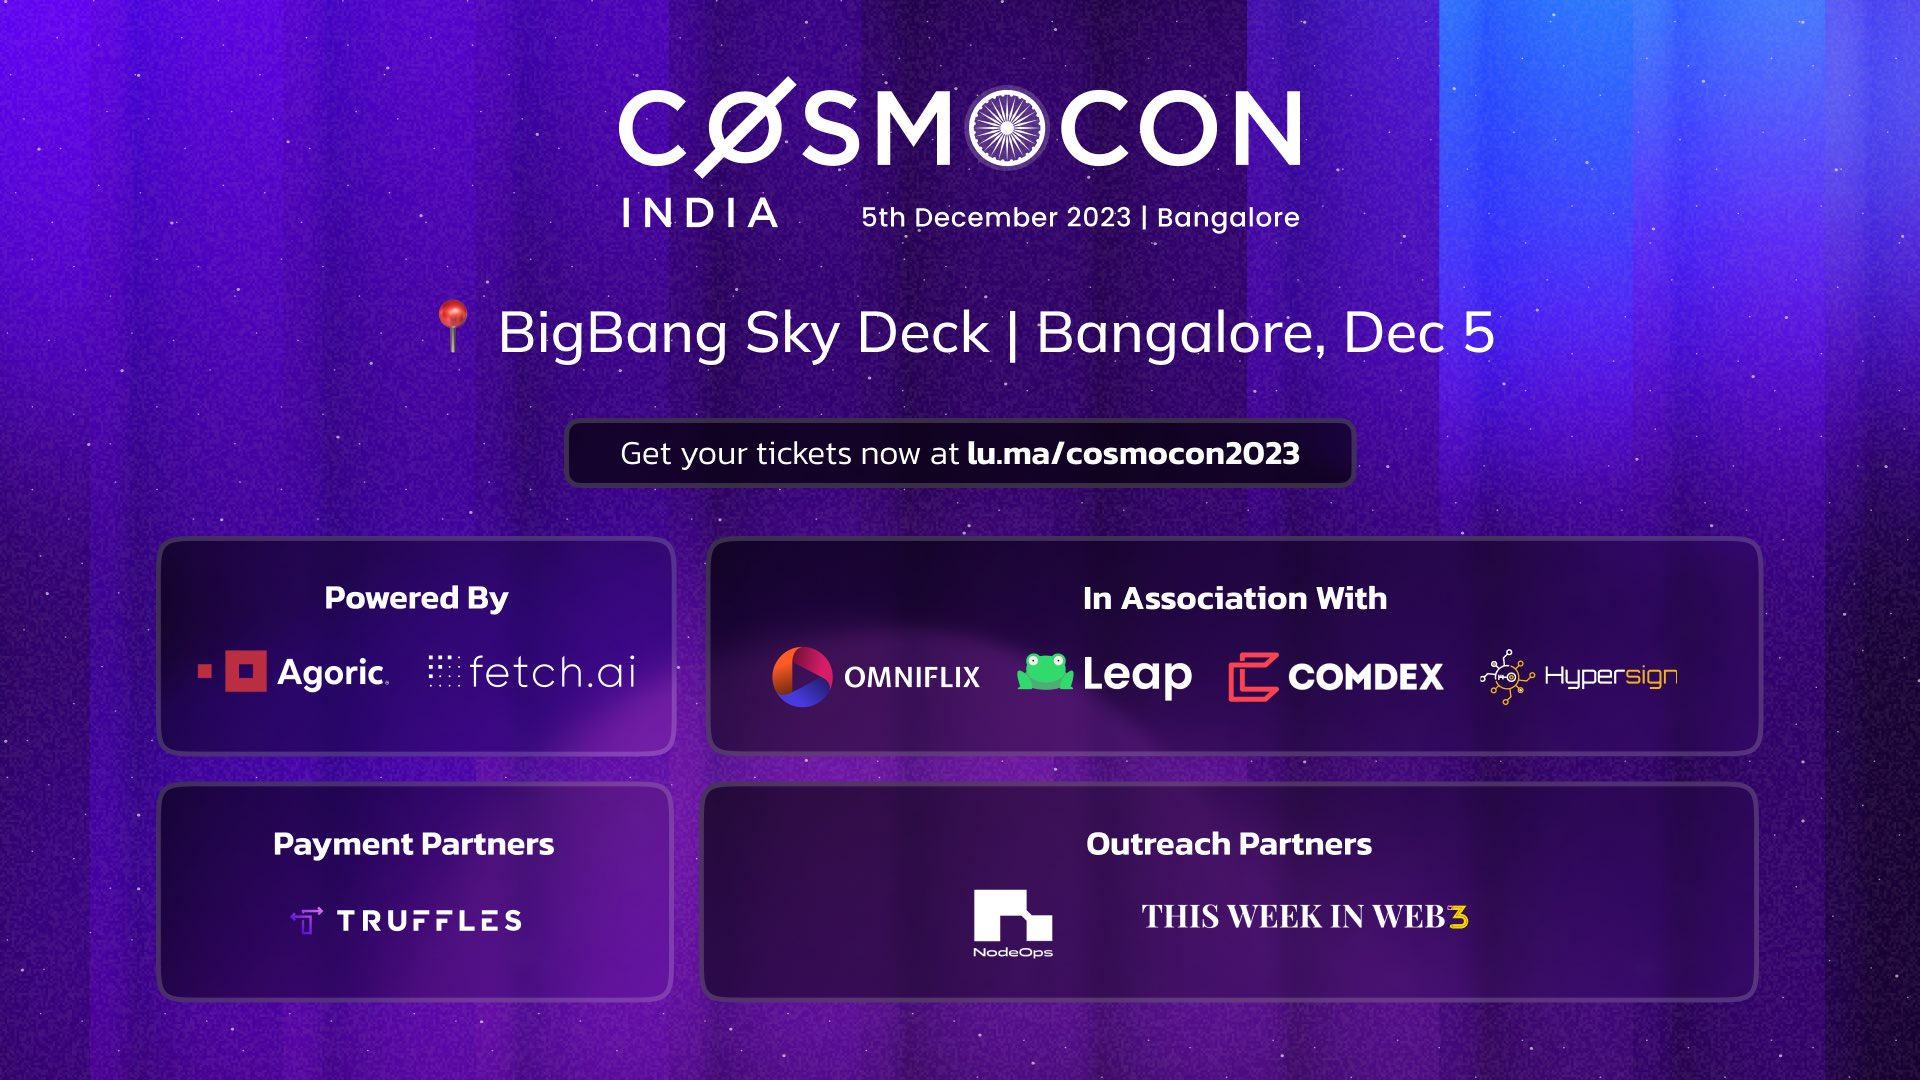 CosmoCon'23 in Bangalore on December 5